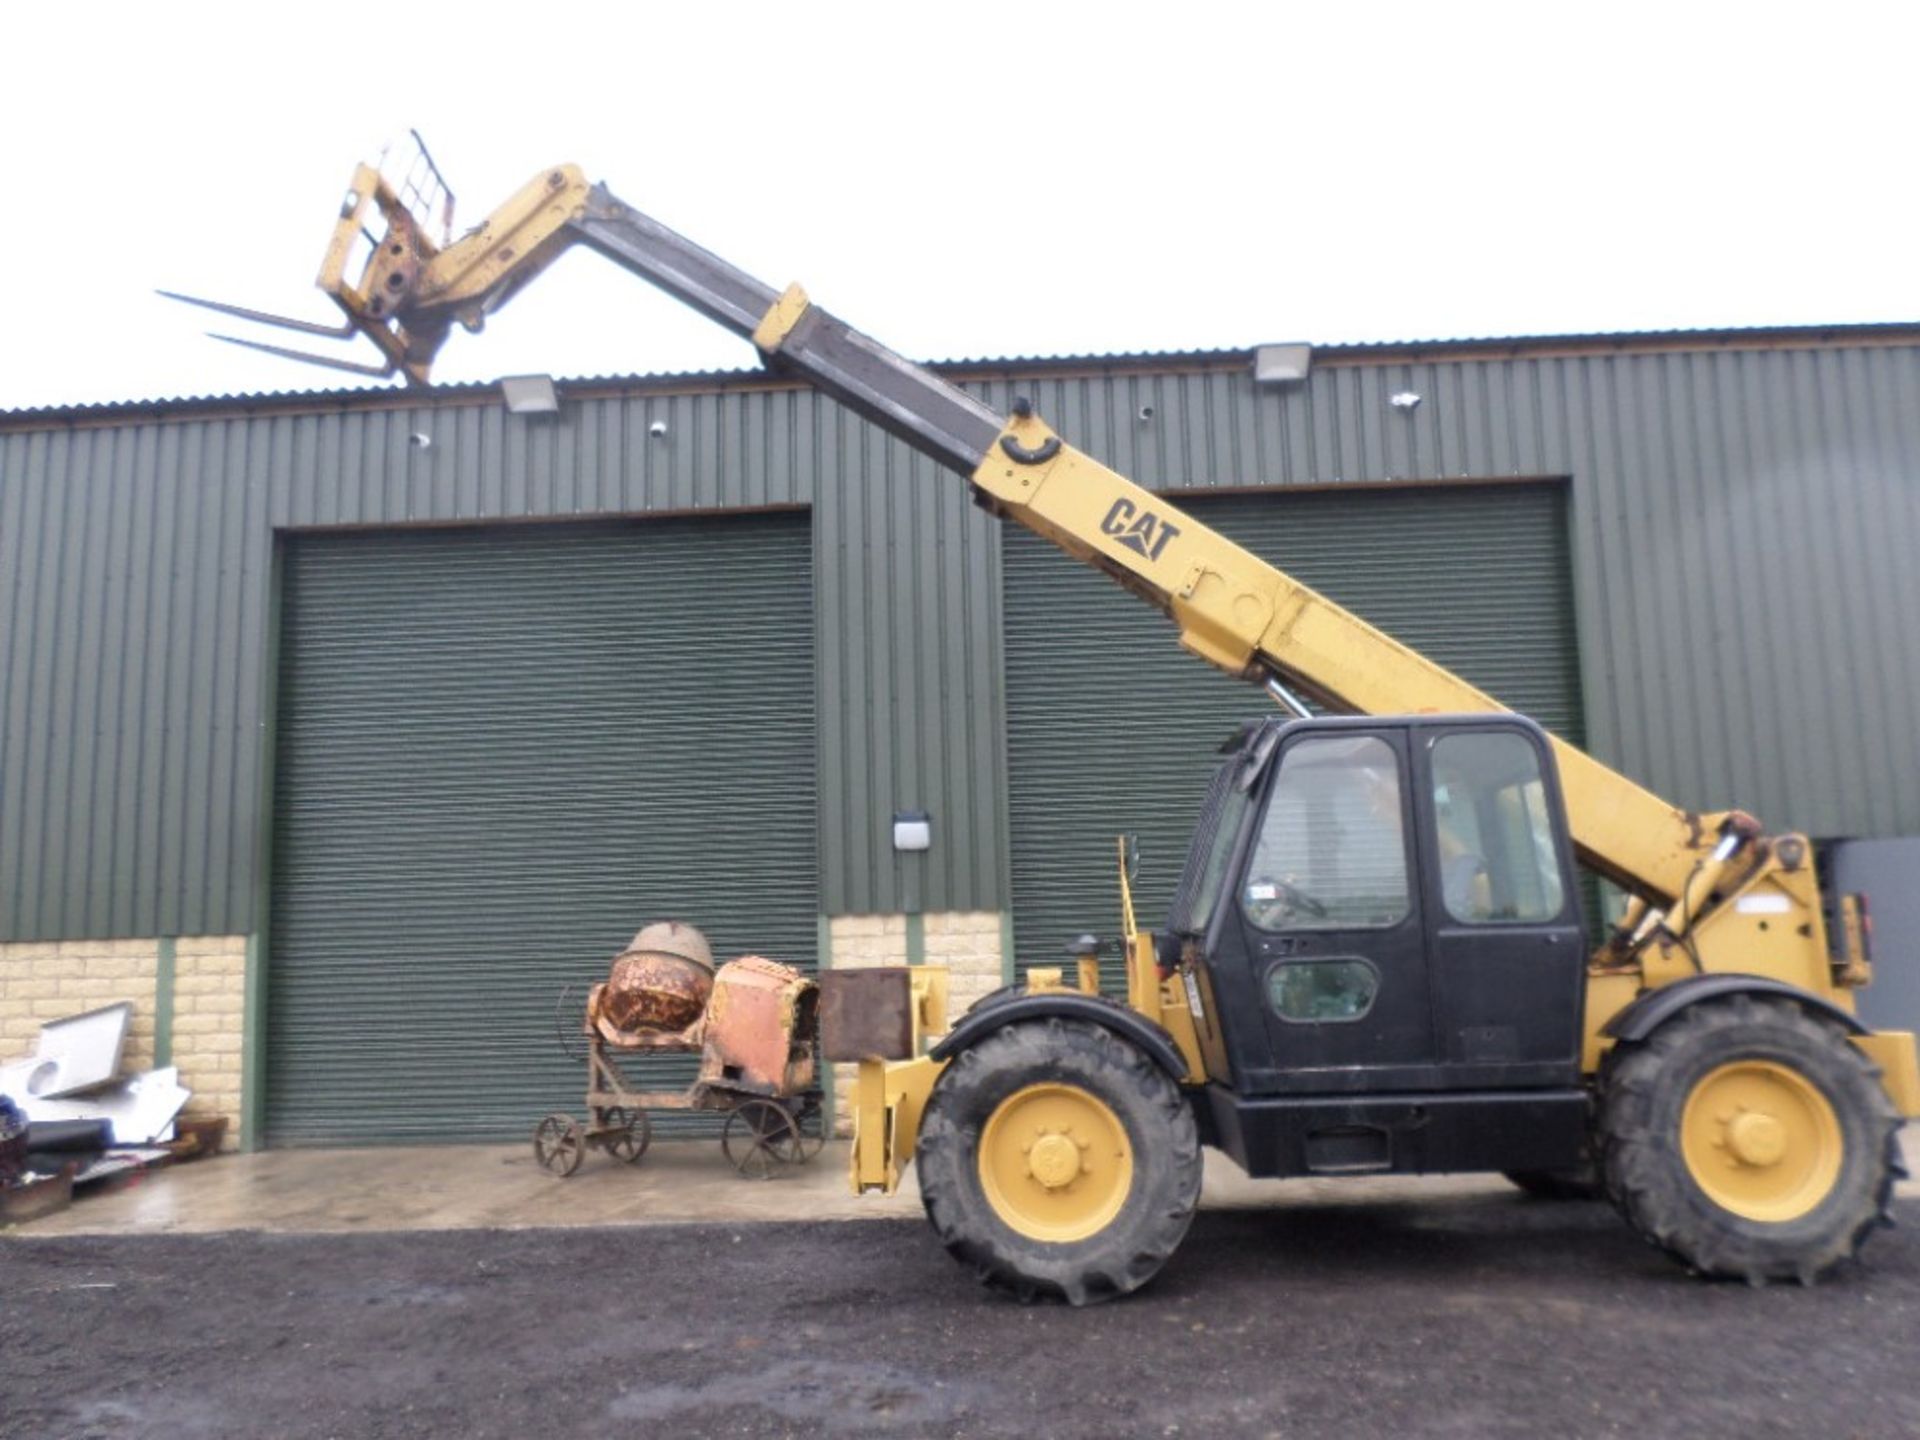 1999 CAT TH63 TELEPORTER (LOCATON SHEFFIELD) 5612 HOURS (RING FOR COLLECTION DETAILS) [+ VAT] - Image 5 of 13